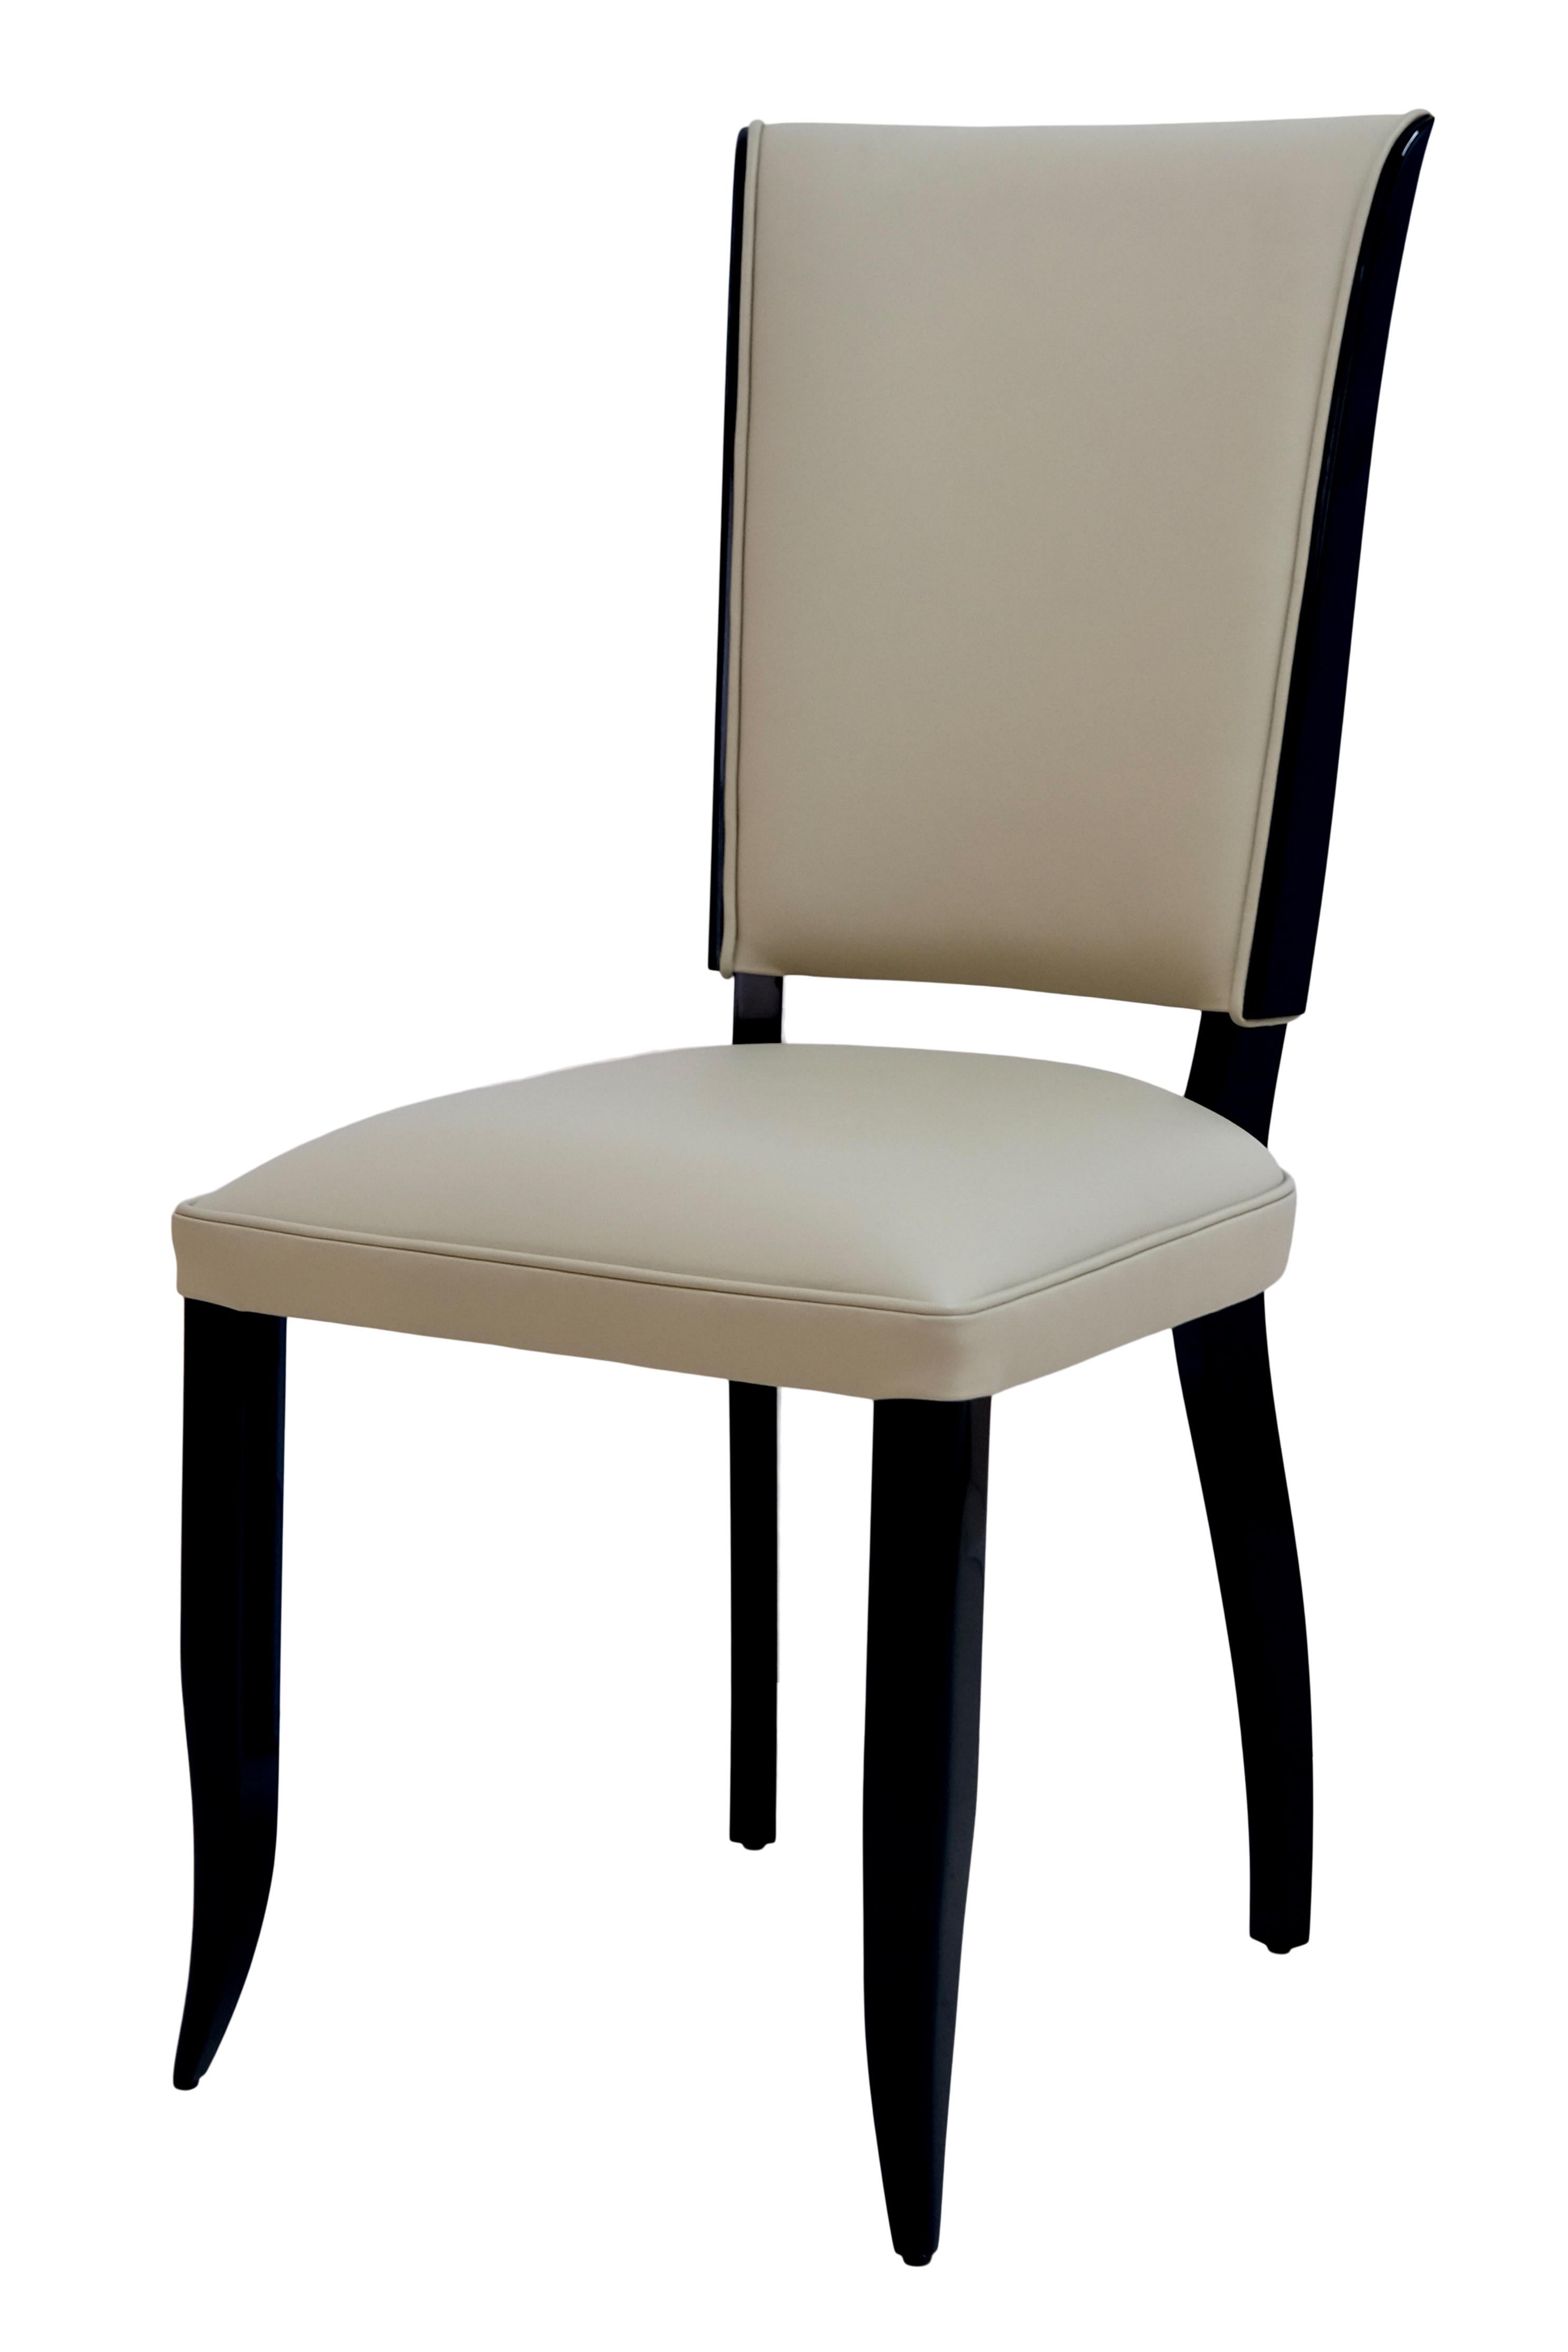 Dining room chairs with deep seat, therefore best suited for tall people
High gloss black piano lacquer
Beige leather, freshly upholstered

Set consisting of 6 pieces

Original Art Deco, France 1930s

Dimensions:
Width: 46 cm
Height: 108